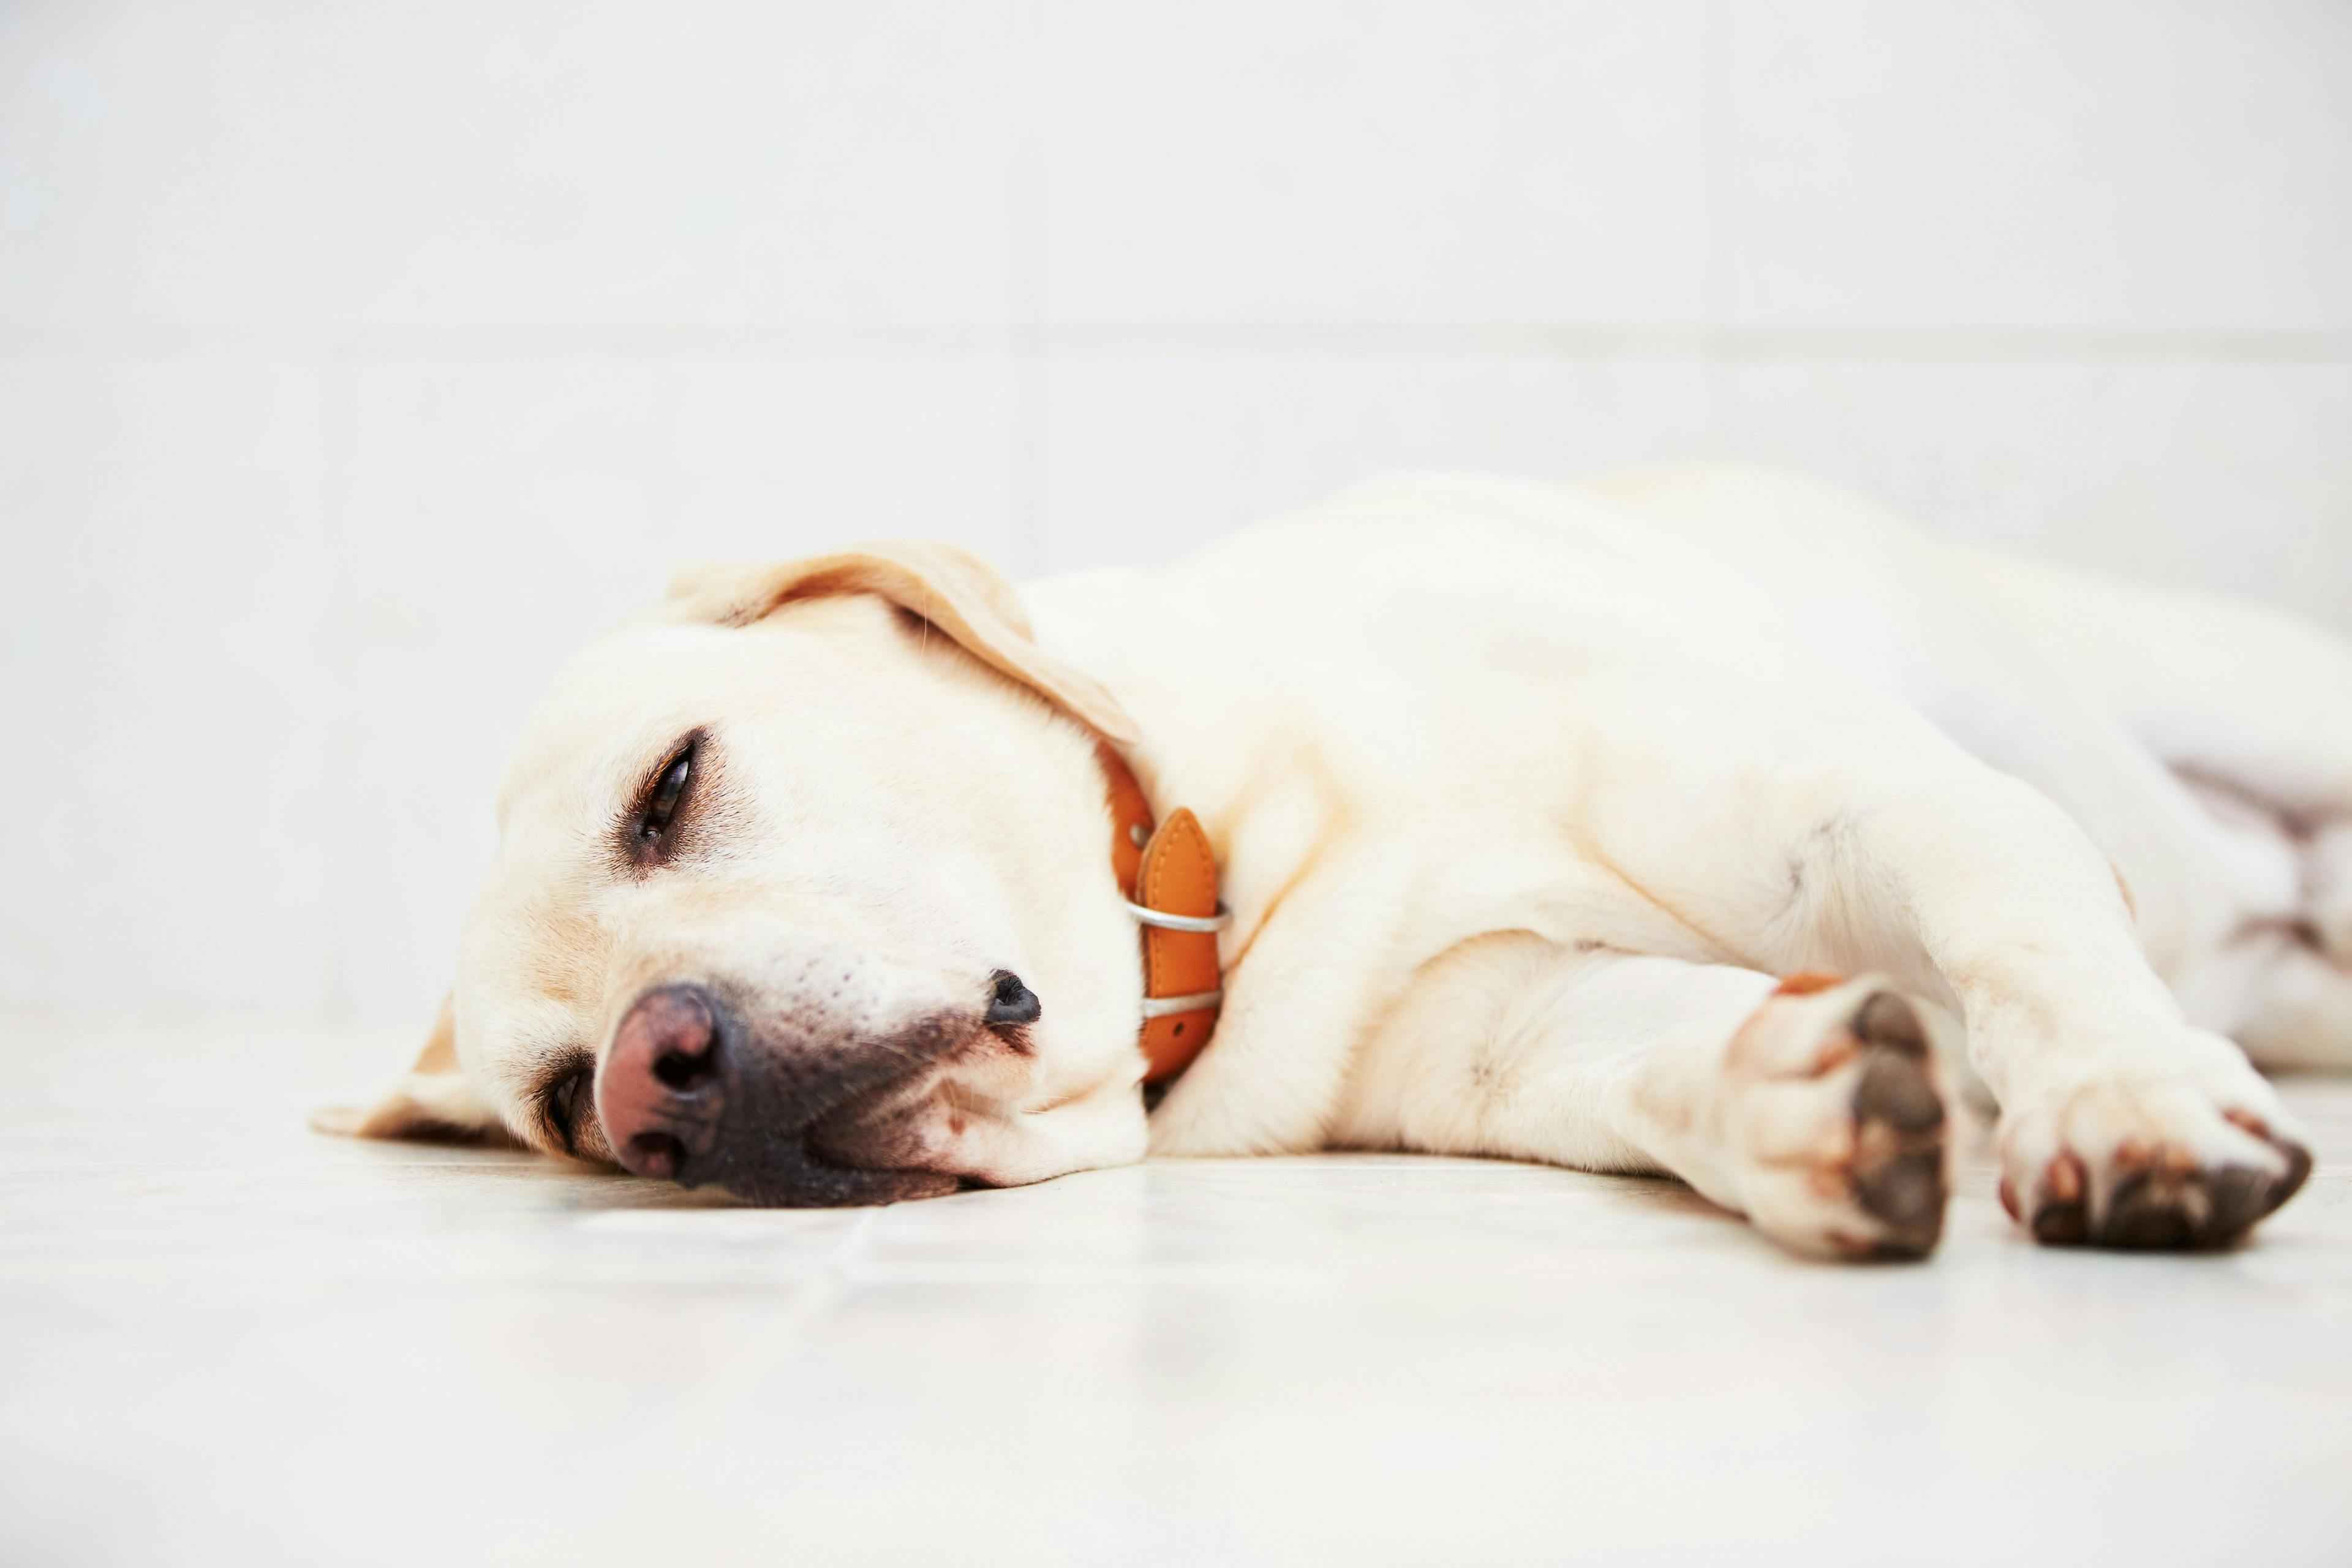 FDA extends expiration date for solution to induce vomiting in dogs